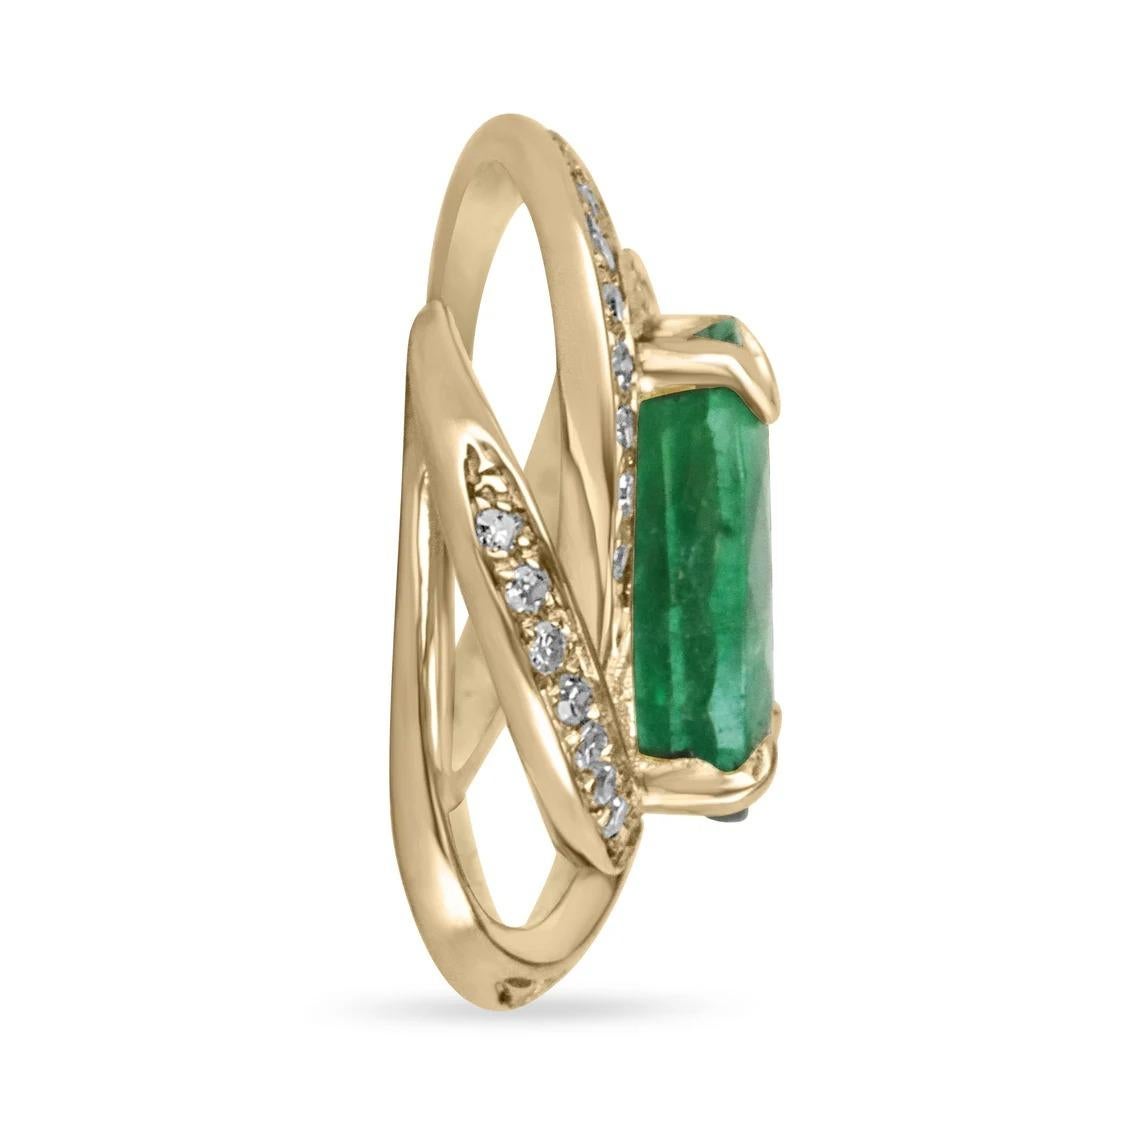 This piece features a remarkable natural oval cut emerald and a unique diamond halo design. The center gemstone has a medium green color with very good clarity and luster. Petite brilliant round cut diamonds intertwine within the stone creating a